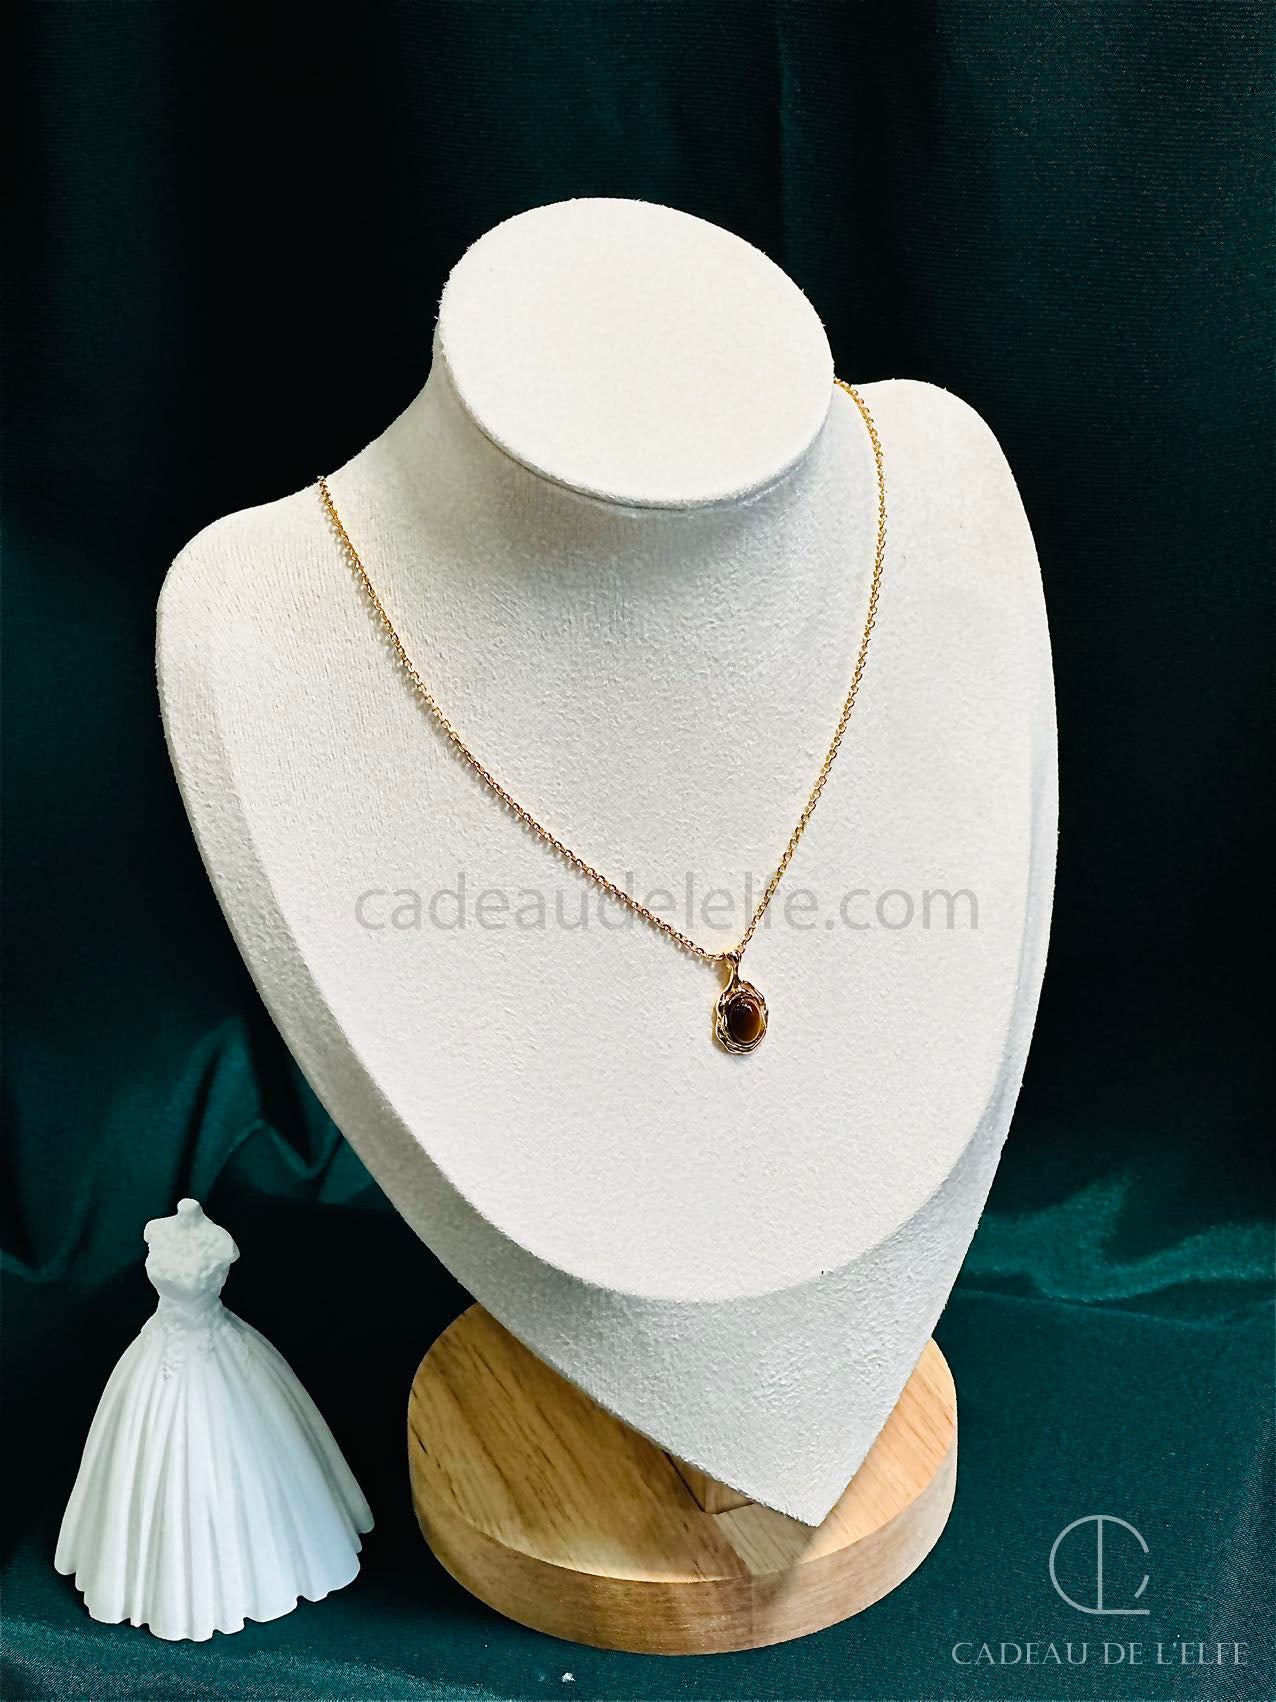 Pure silver necklace with a tiger eye stone pendant